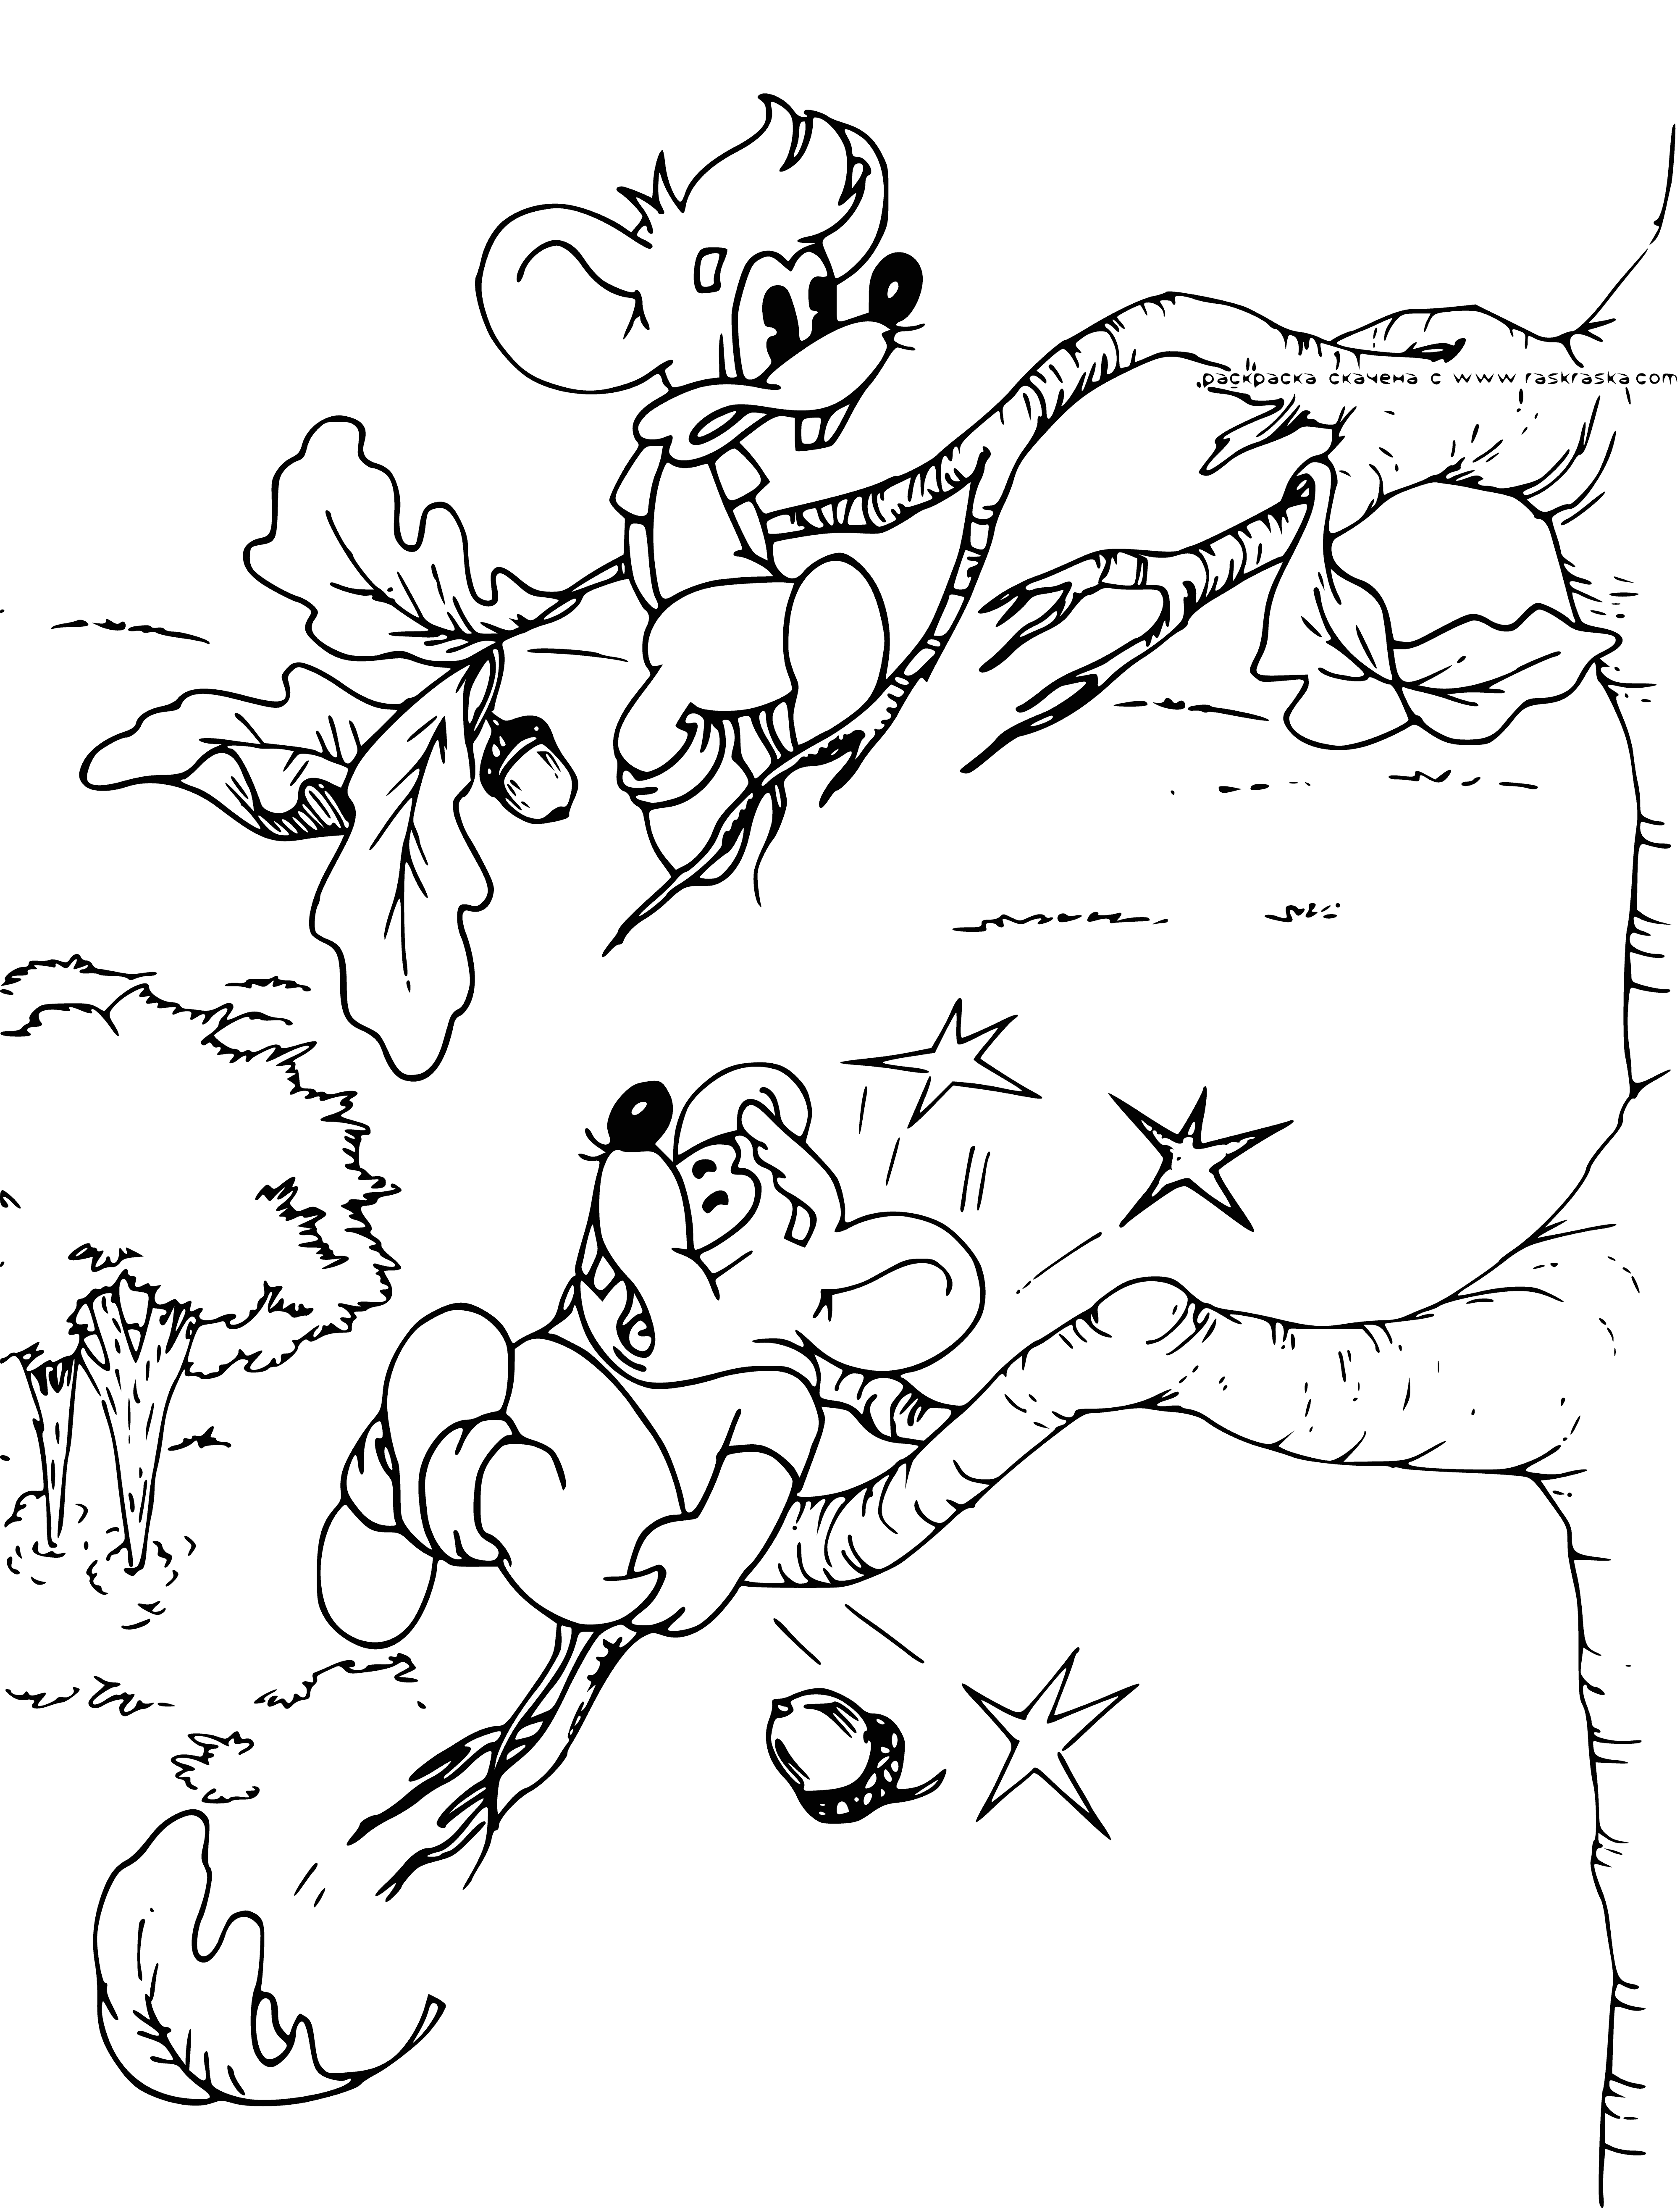 coloring page: Cartoon cat falls out of a tree, surprised expression, body rotated for fall, leaves falling around.